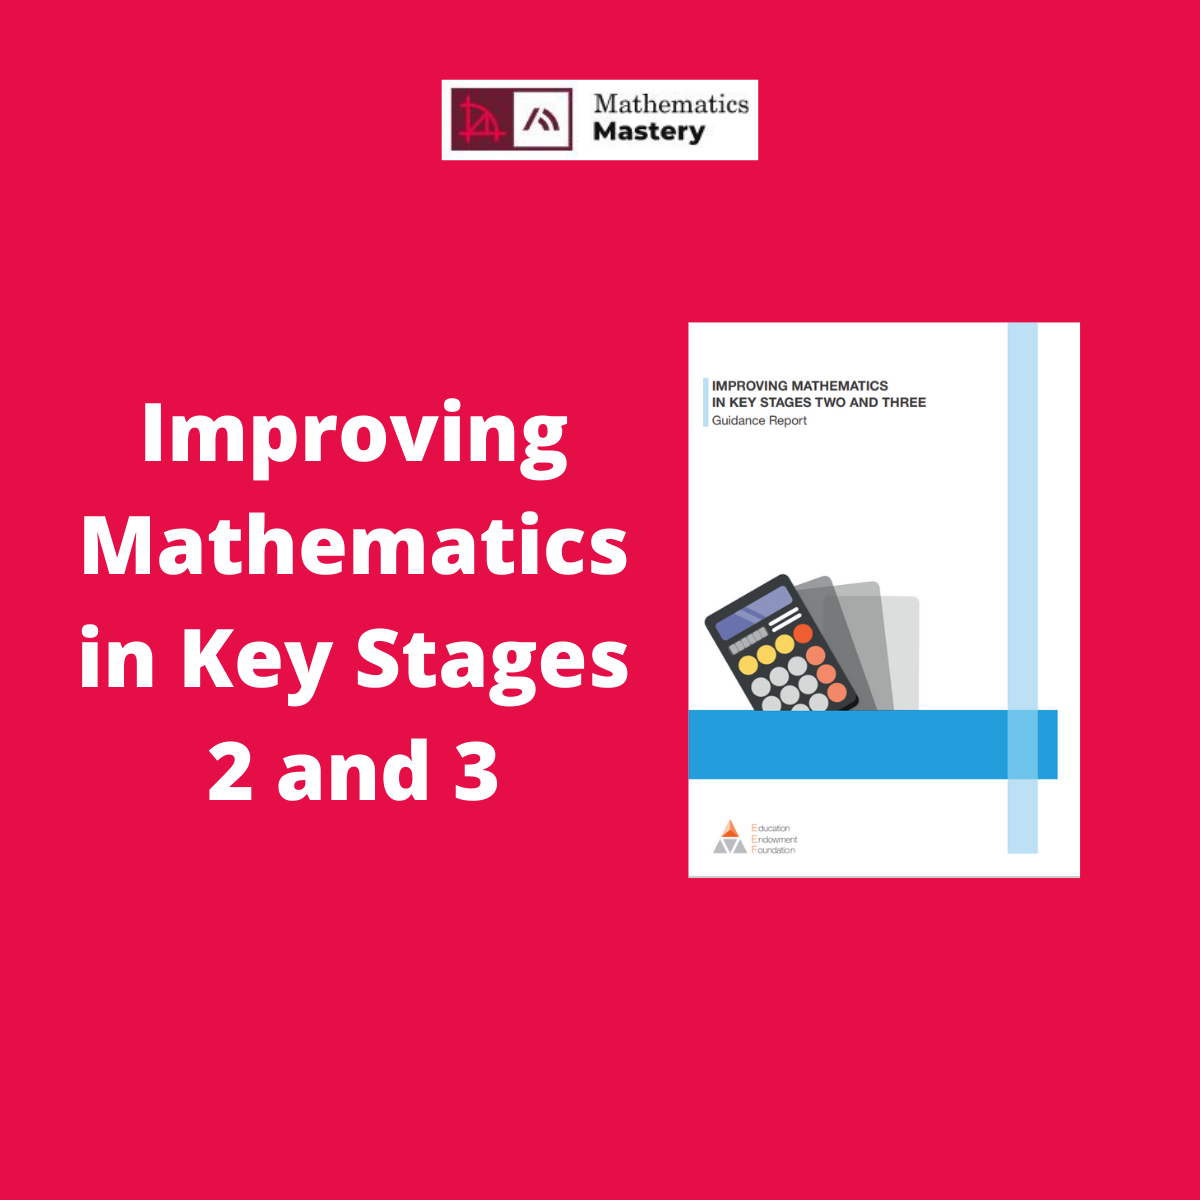 How does the Mathematics Mastery programme match the EEF guidance on improving outcomes in maths at KS2 and 3?